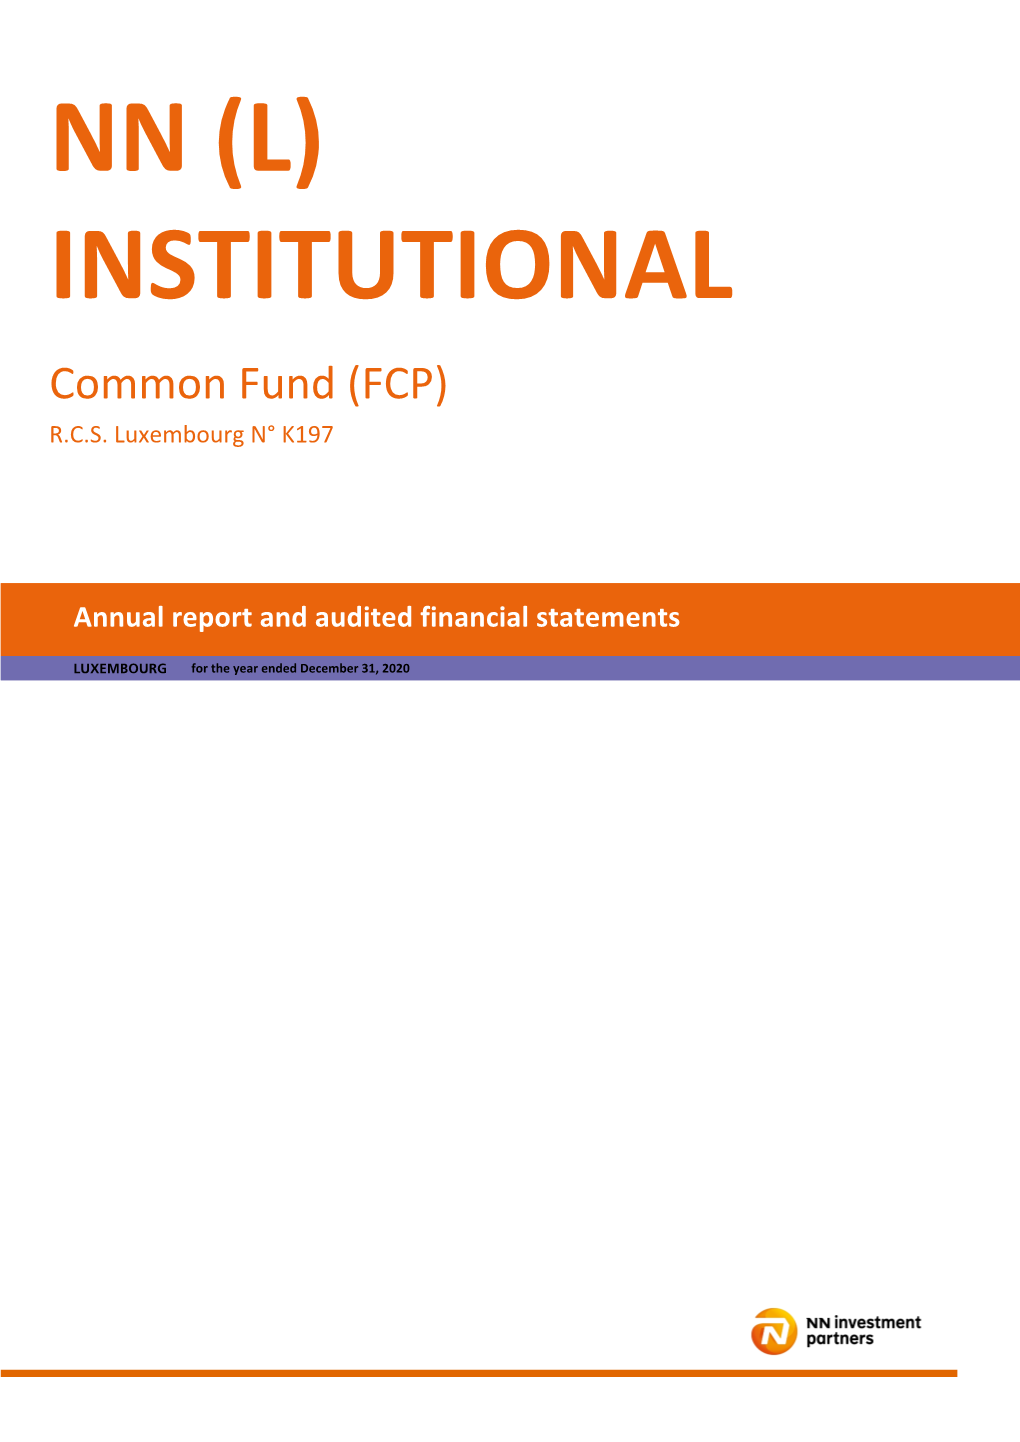 NN (L) INSTITUTIONAL Common Fund (FCP) R.C.S